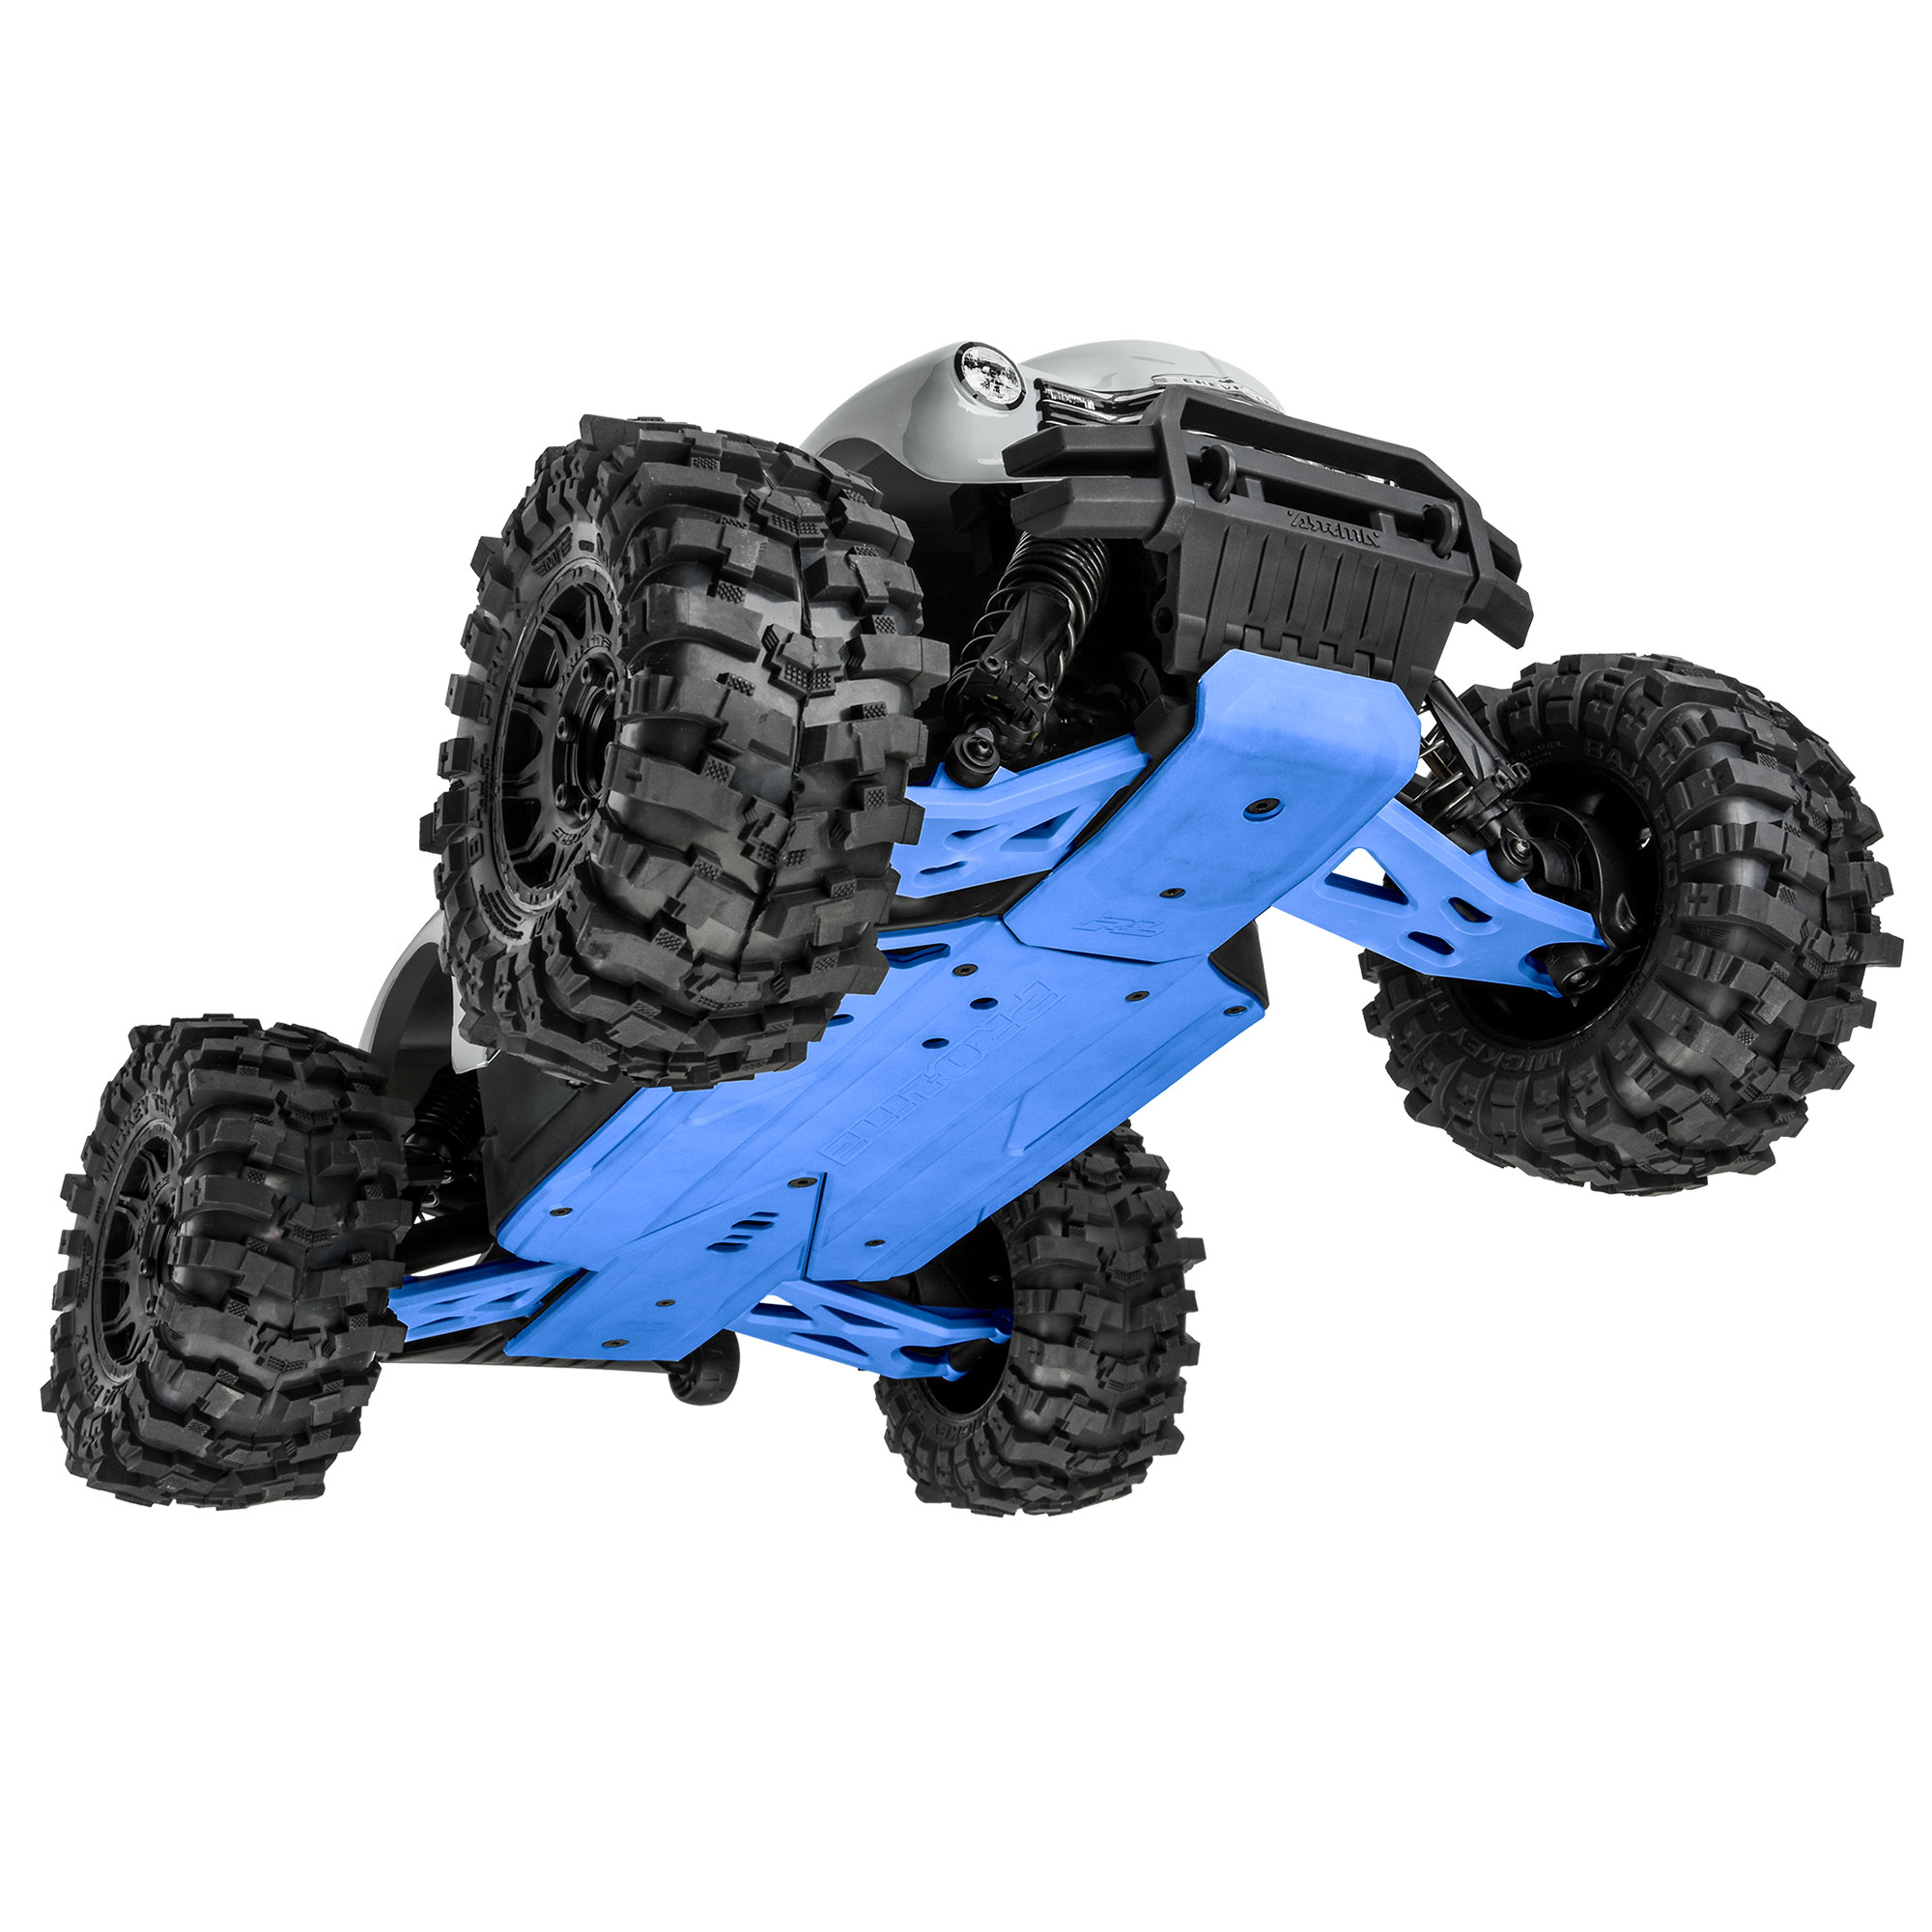 Bash Armor Rear Suspension Arms (Blue) for ARRMA 3S Vehicles